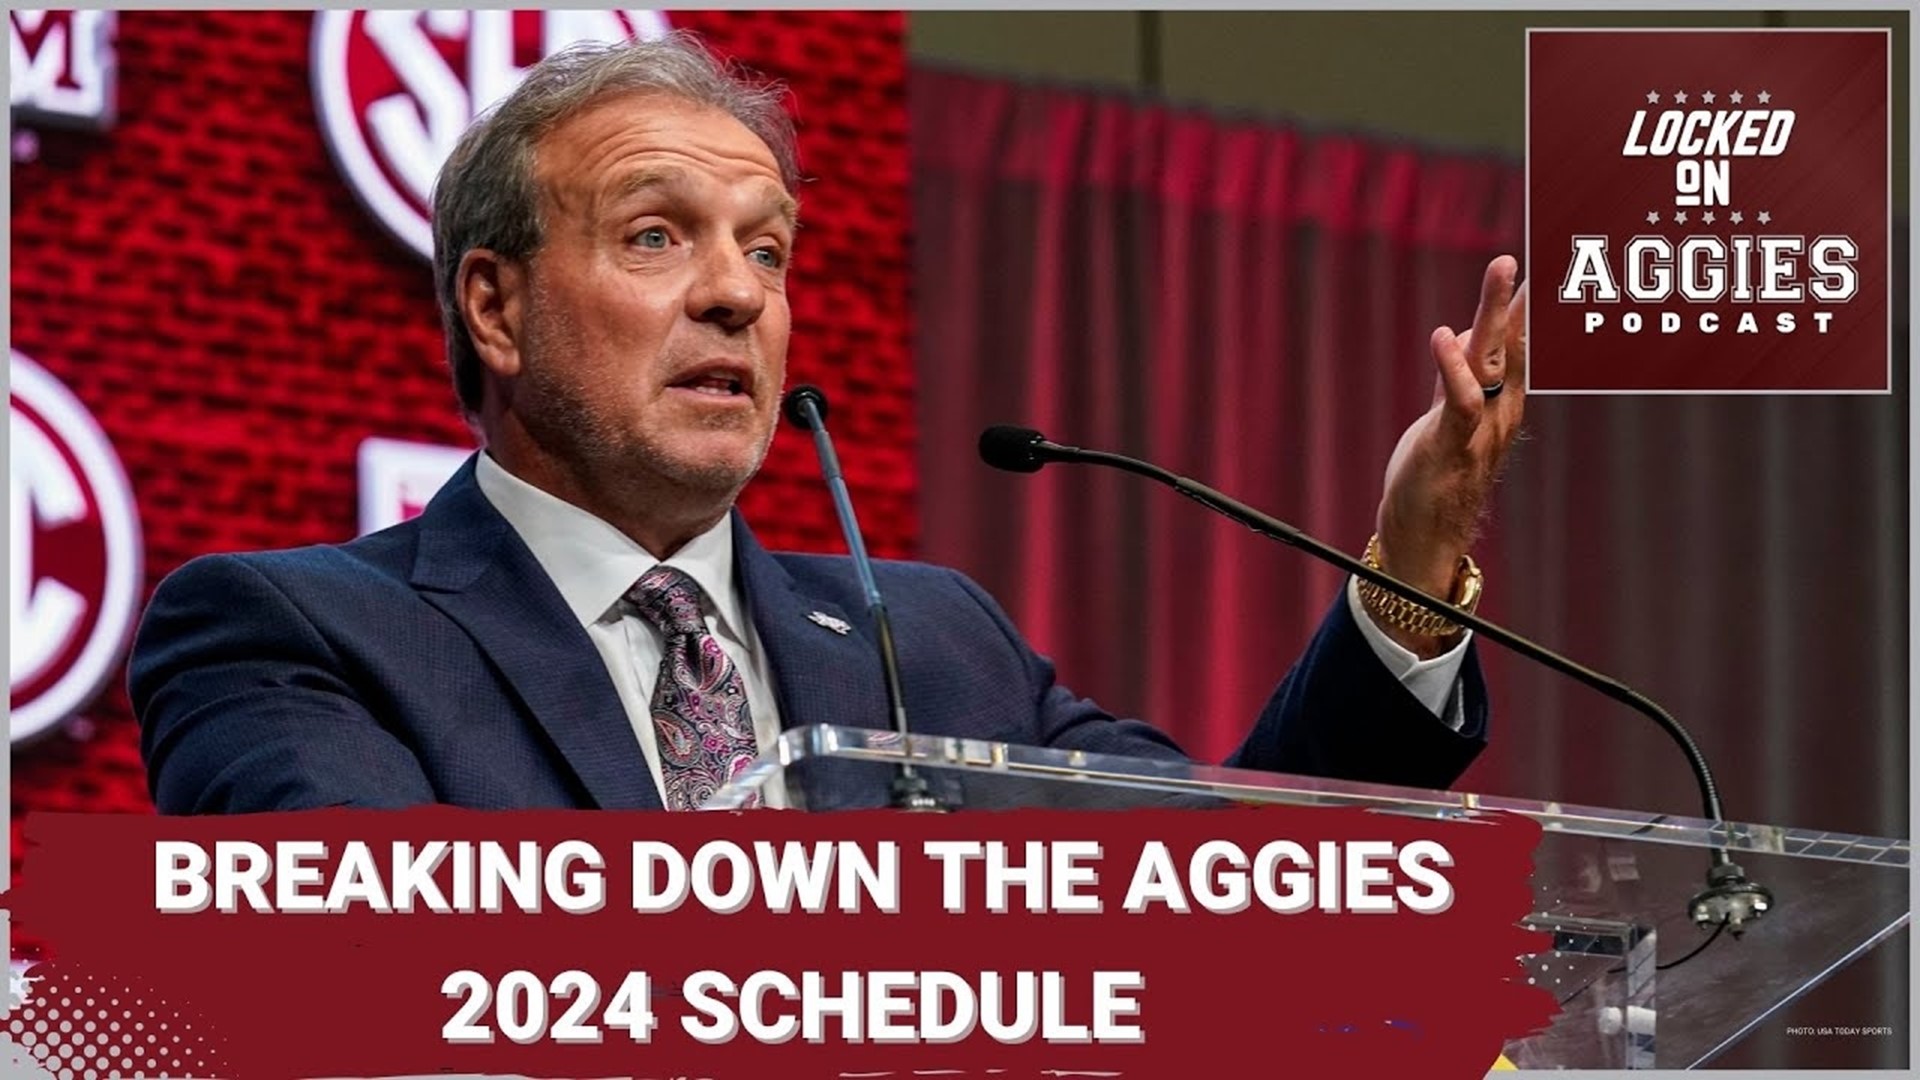 The Aggies were handed a great 2024 schedule by the SEC Texas A&M